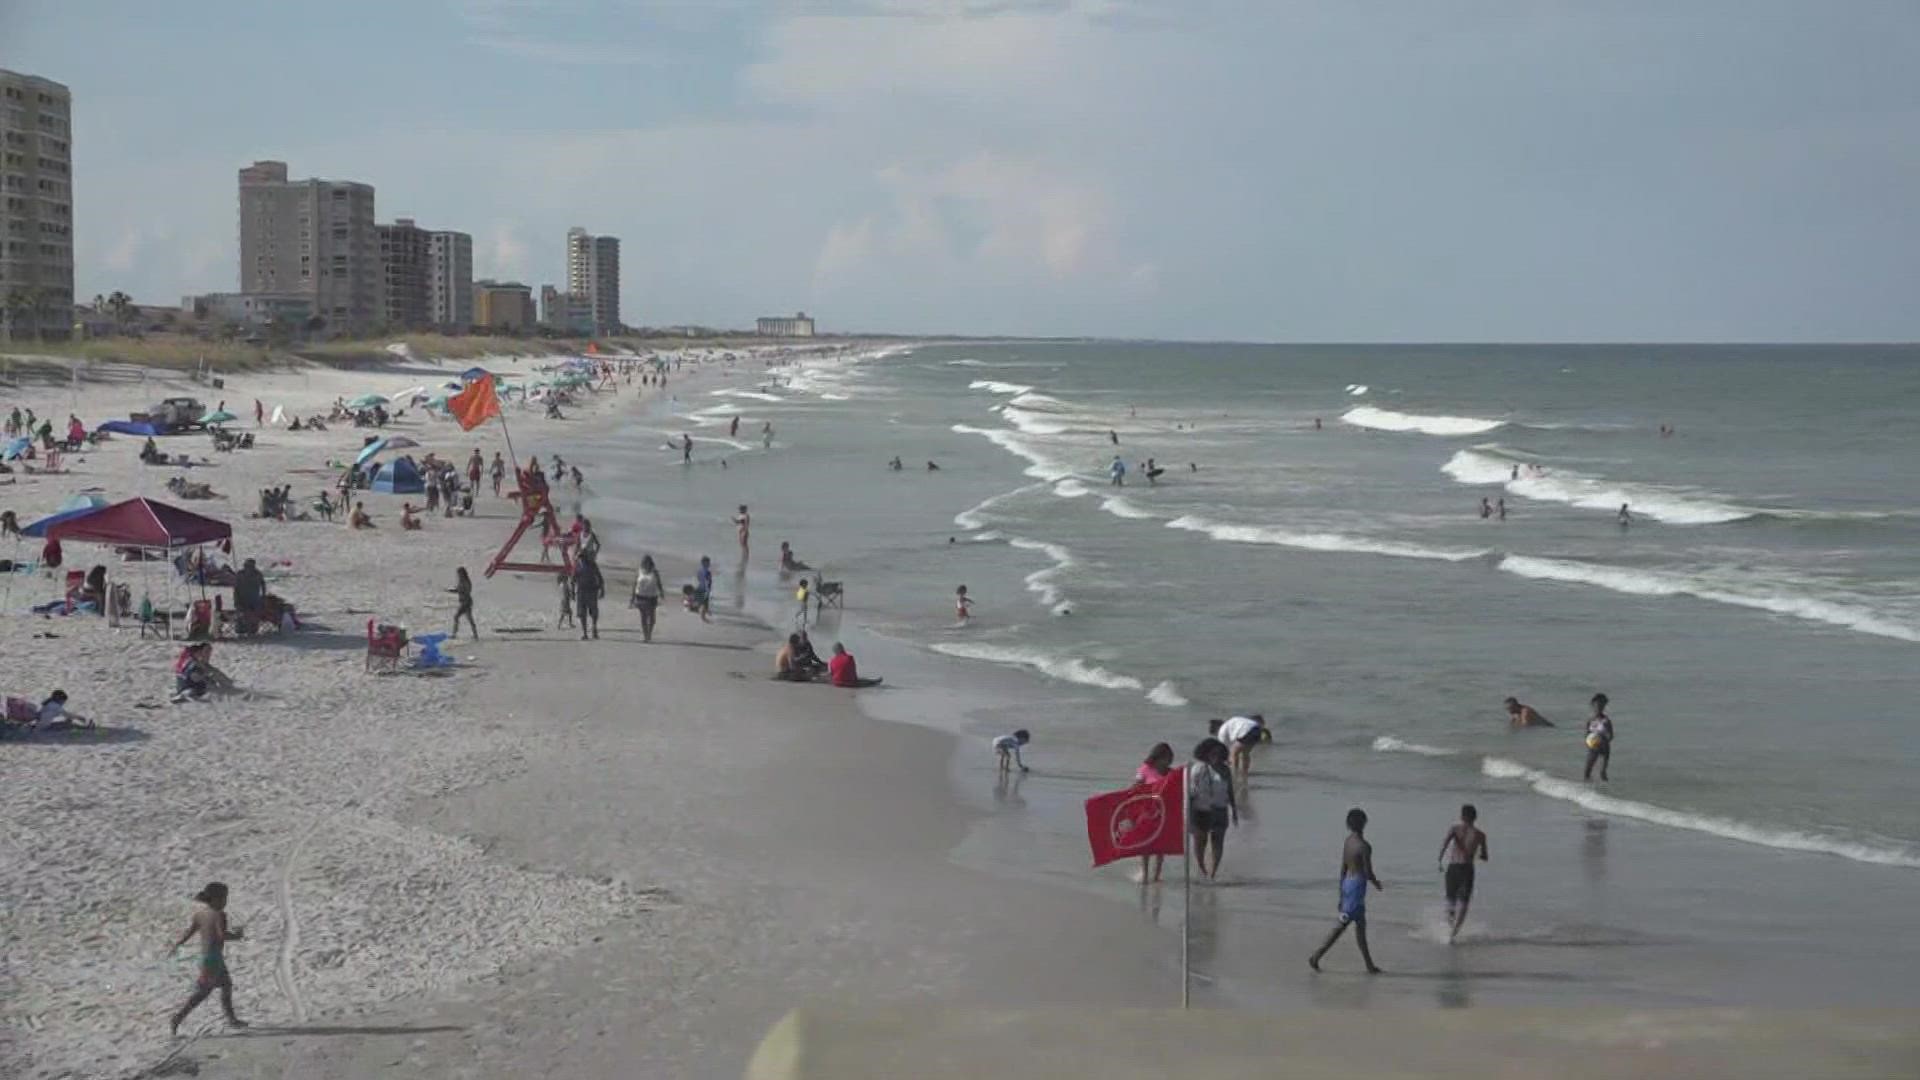 Captain Rob Emahiser says the area around the Jax Beach Pier is a dangerous place to swim. But lifeguards have done a good job handling all types of situations.